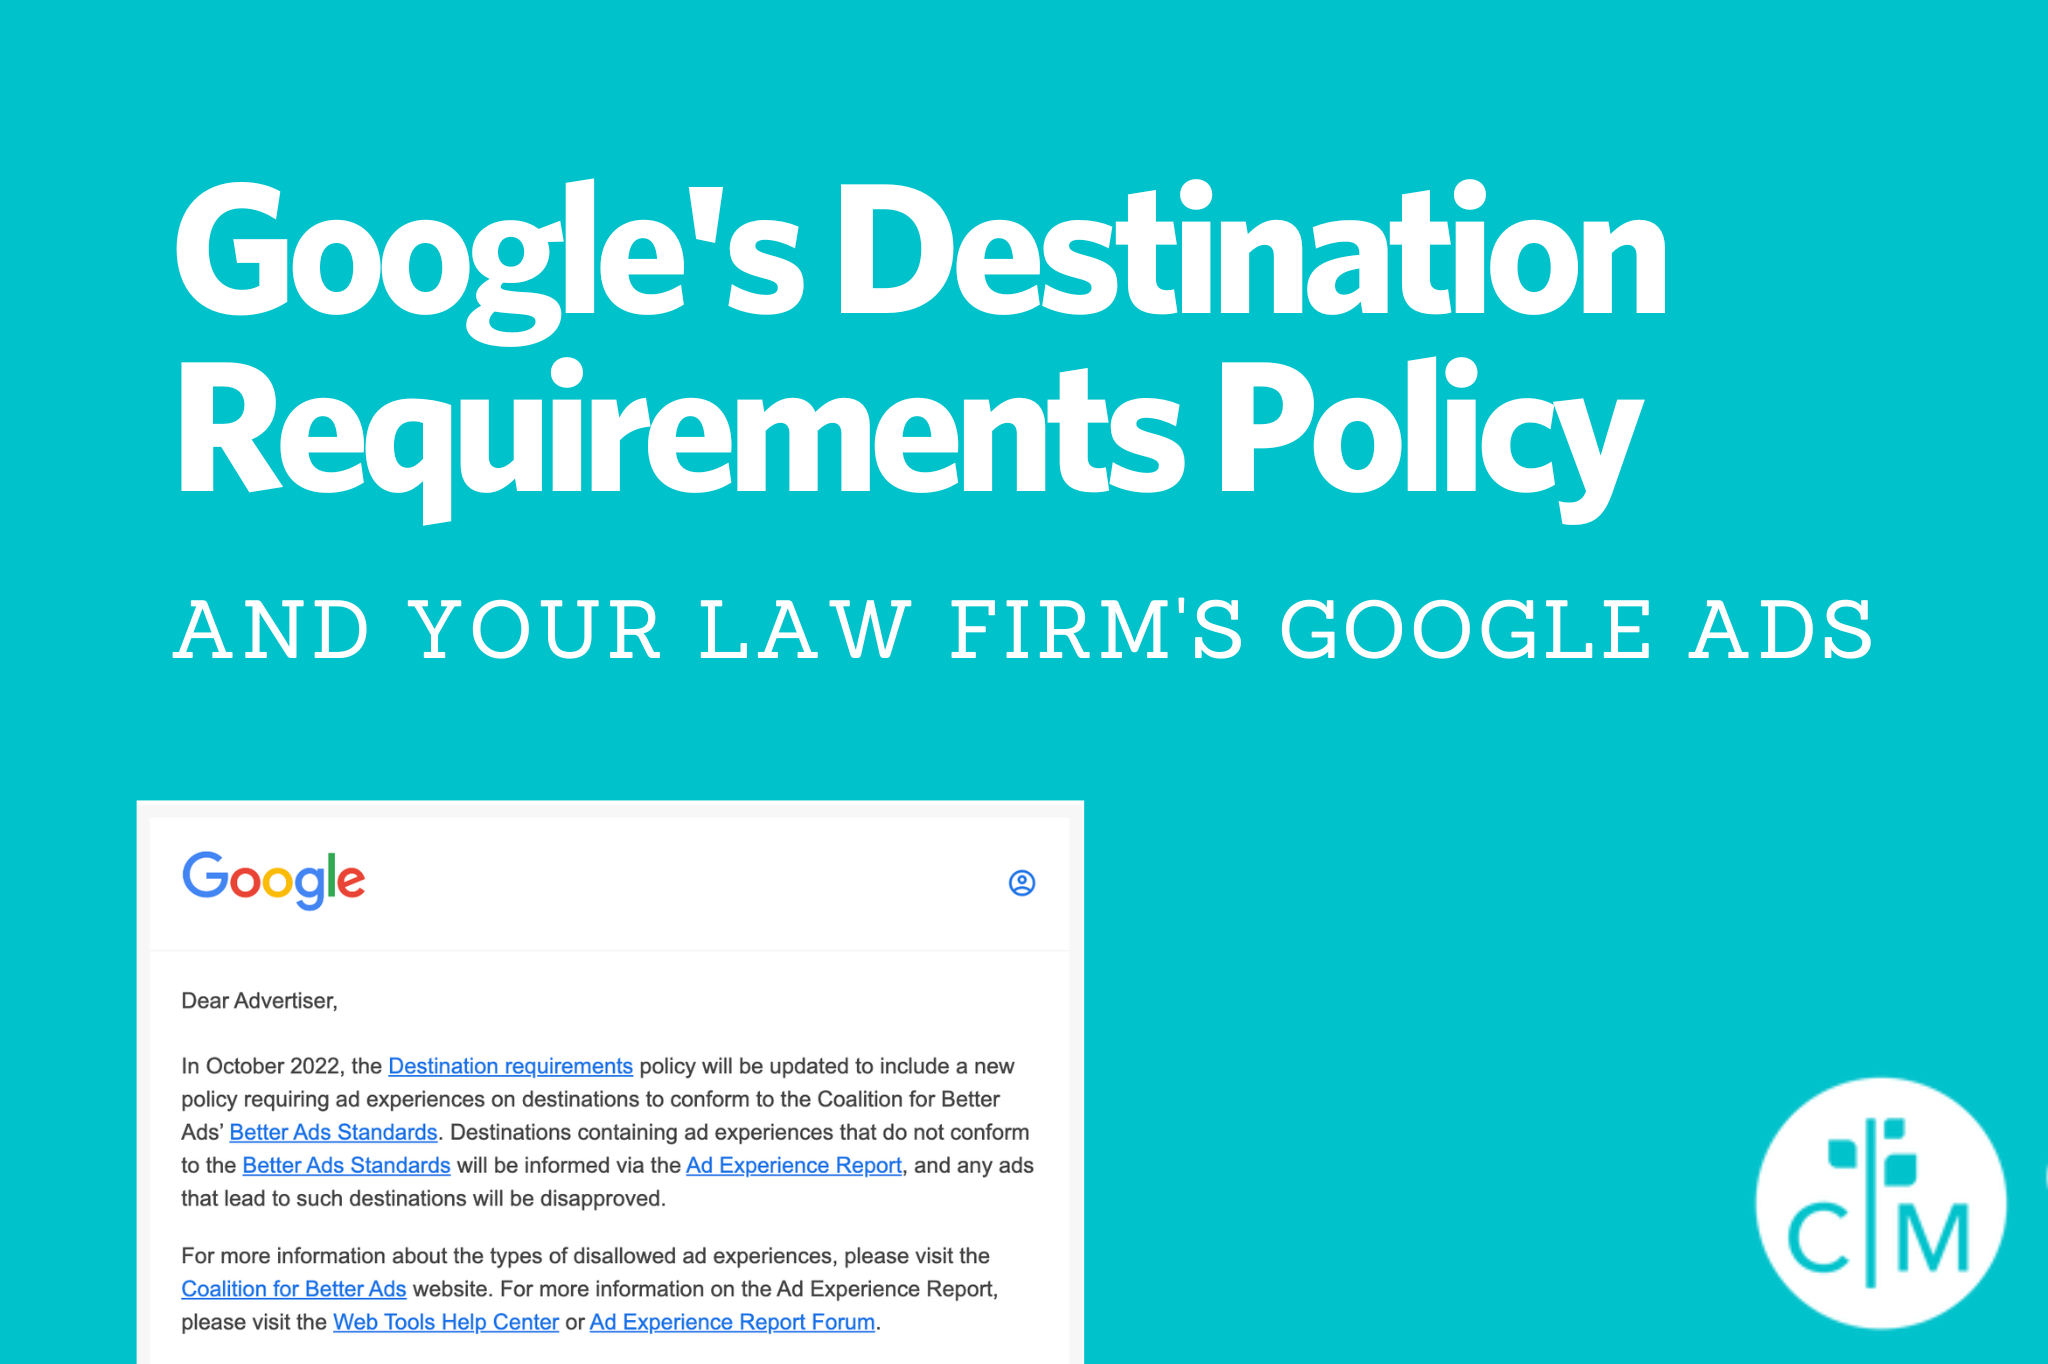 Did You Get Google's Destination Requirements Policy Email? Here's What it Means for Your Law Firm